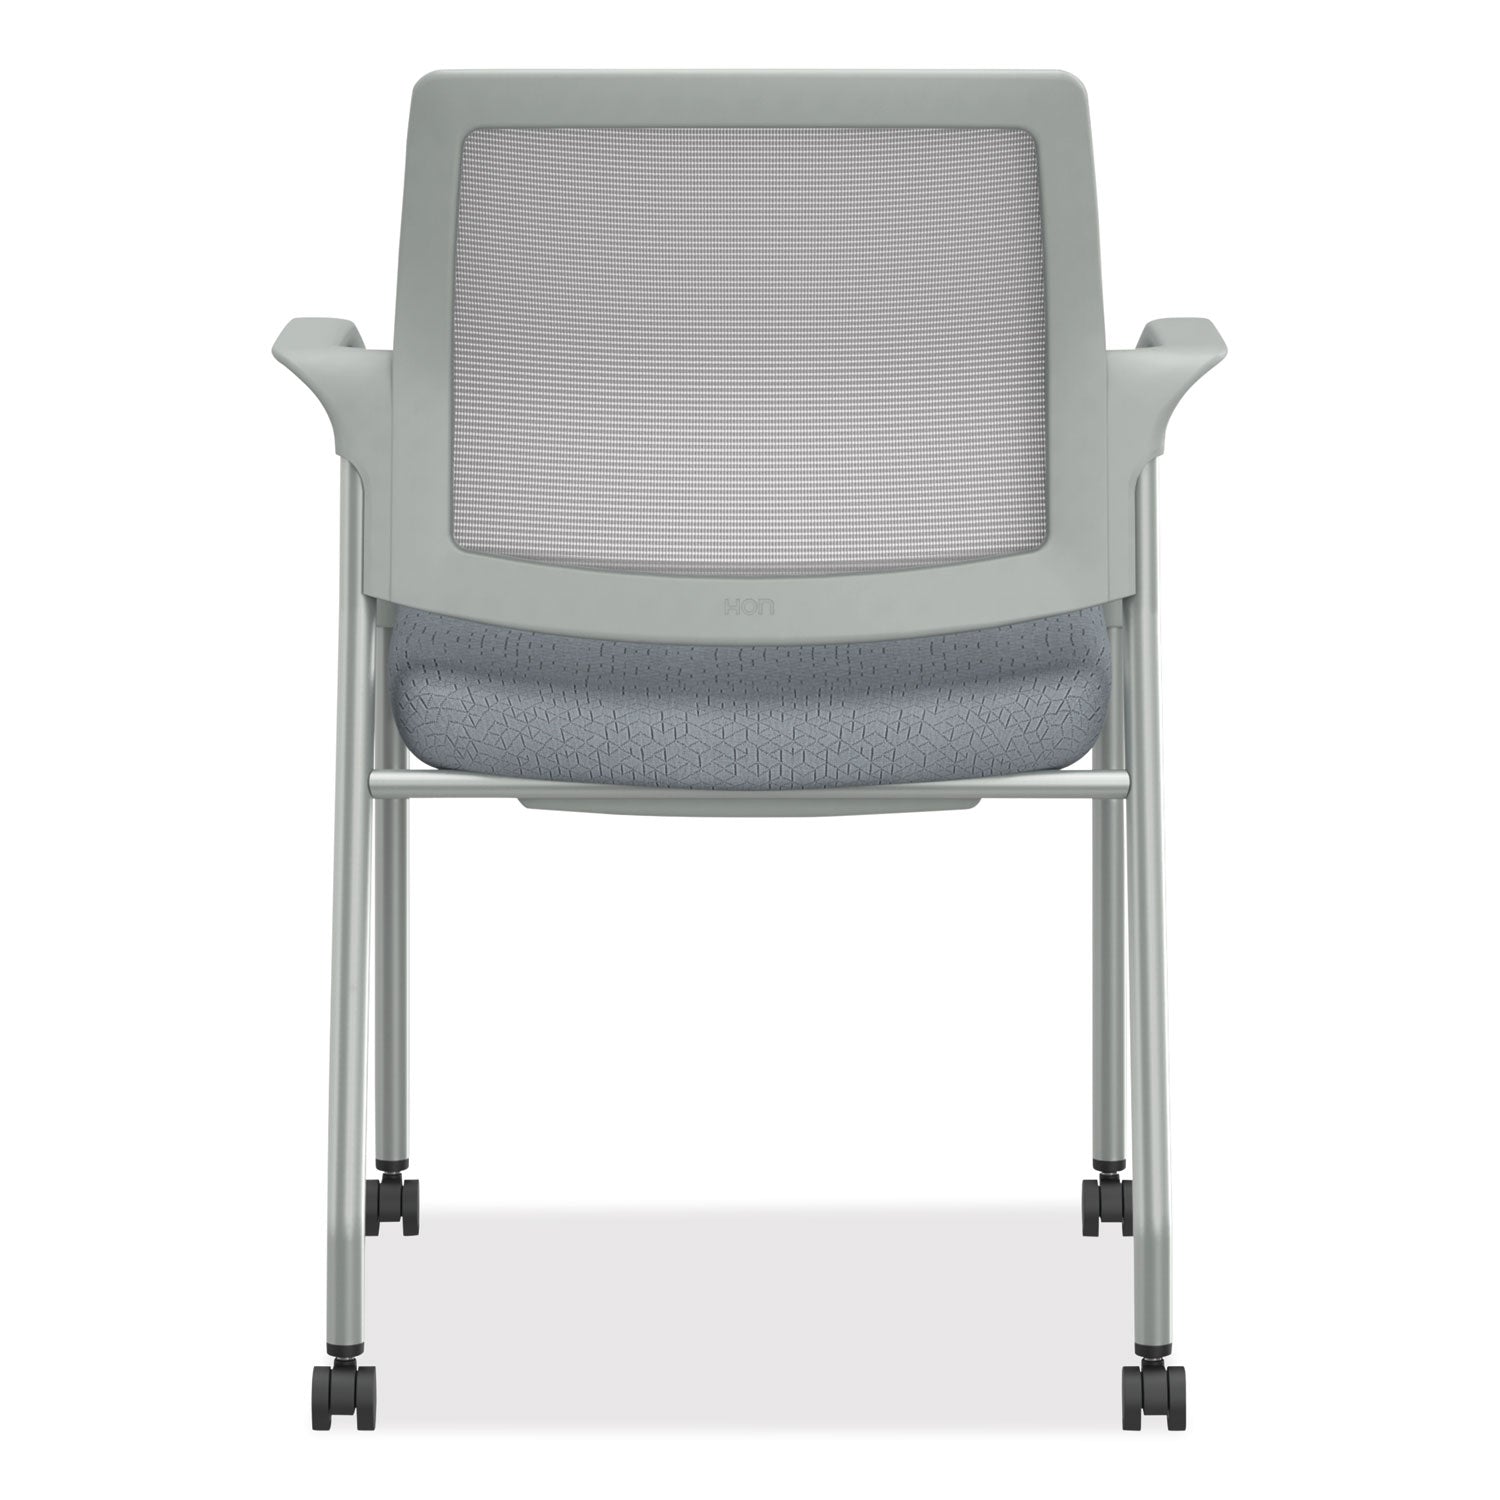 ignition-series-mesh-back-mobile-stacking-chair-25-x-2175-x-335-basalt-fog-textured-silver-base-ships-in-7-10-bus-days_honi2s6fhfa258t - 2